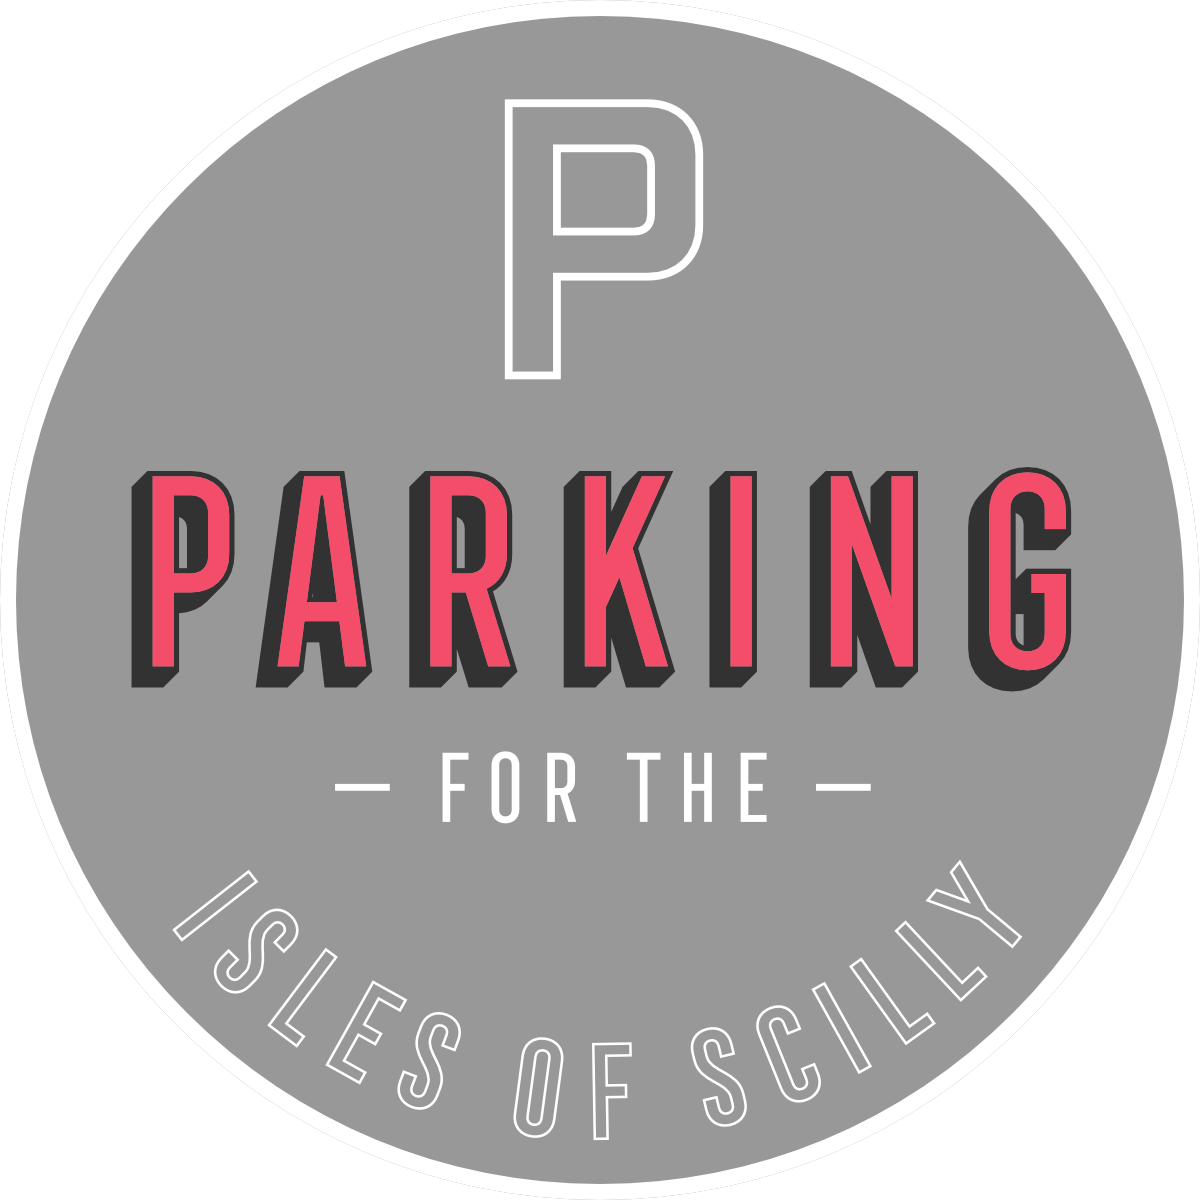 Parking for the Isles of Scilly